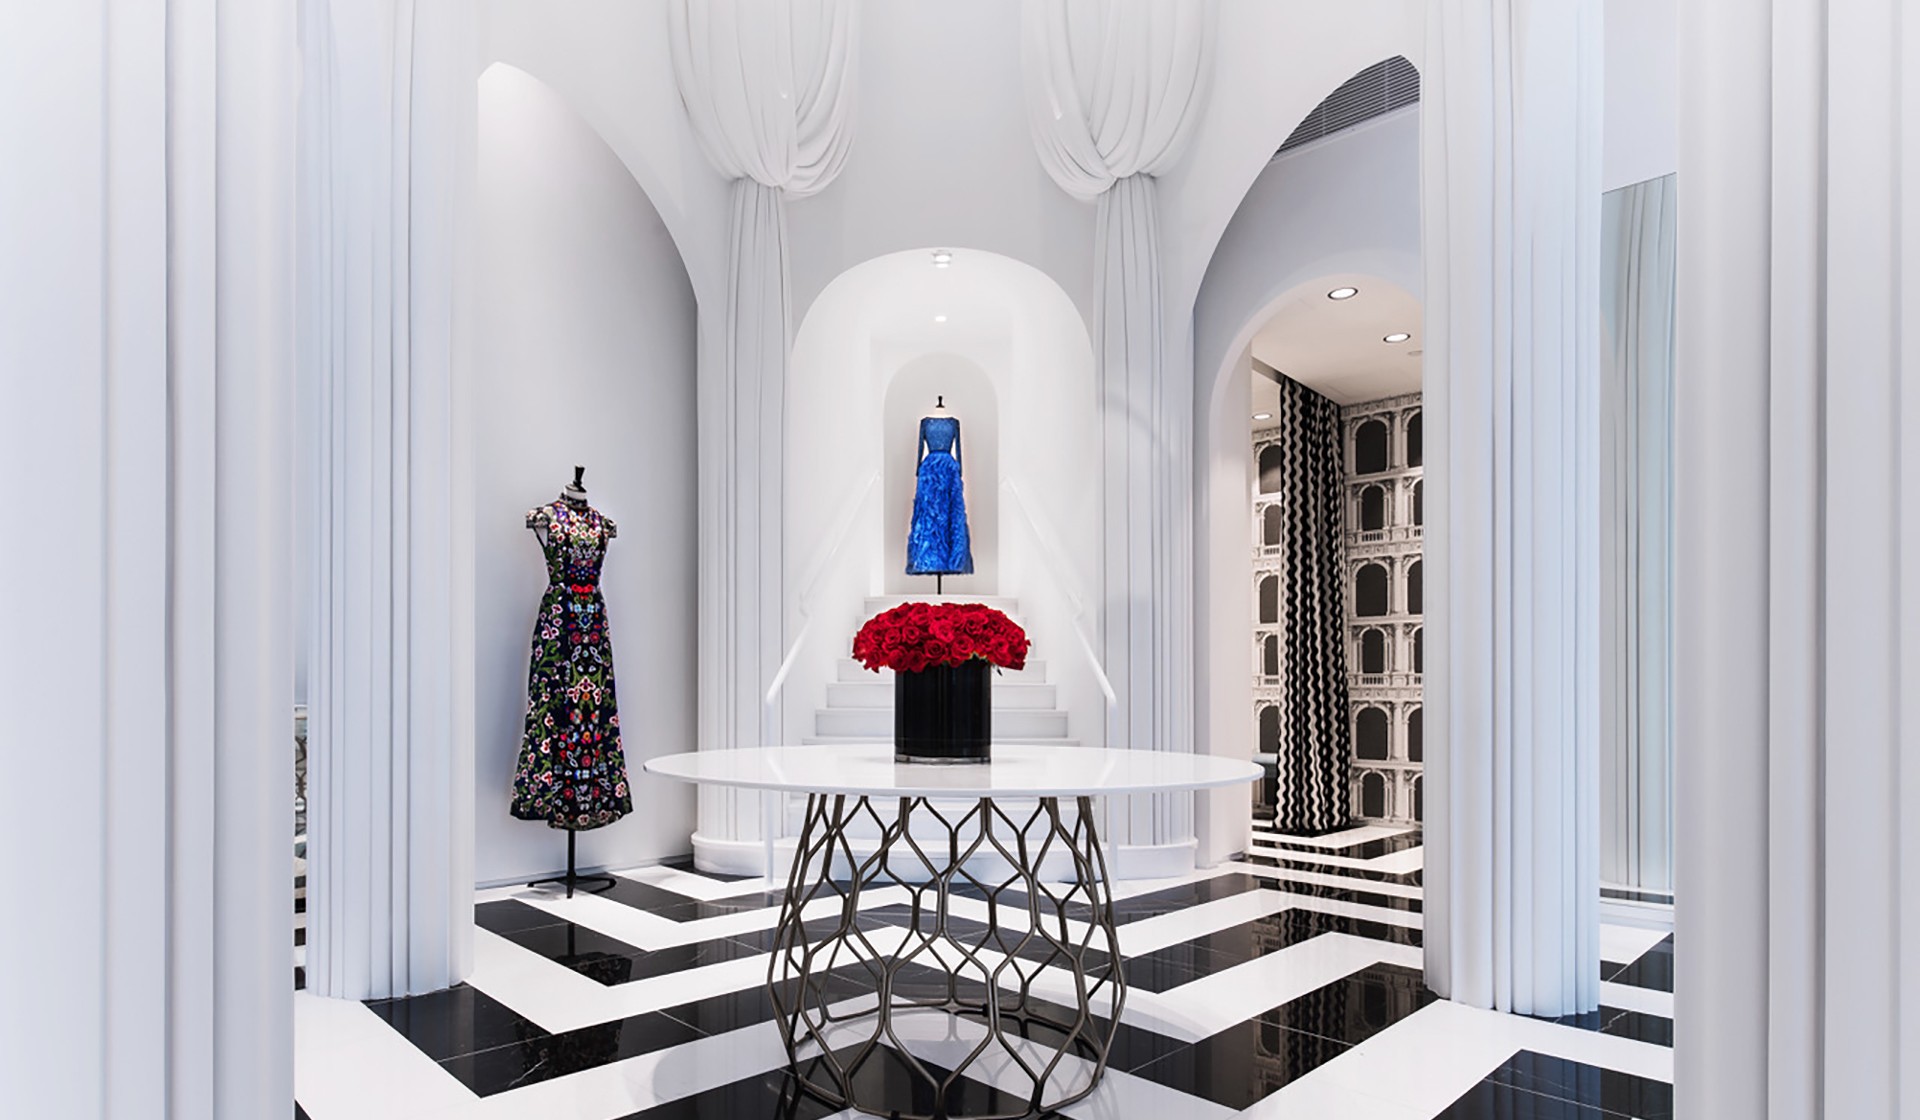 Inside the New Gucci Pop-Up in Miami Design District